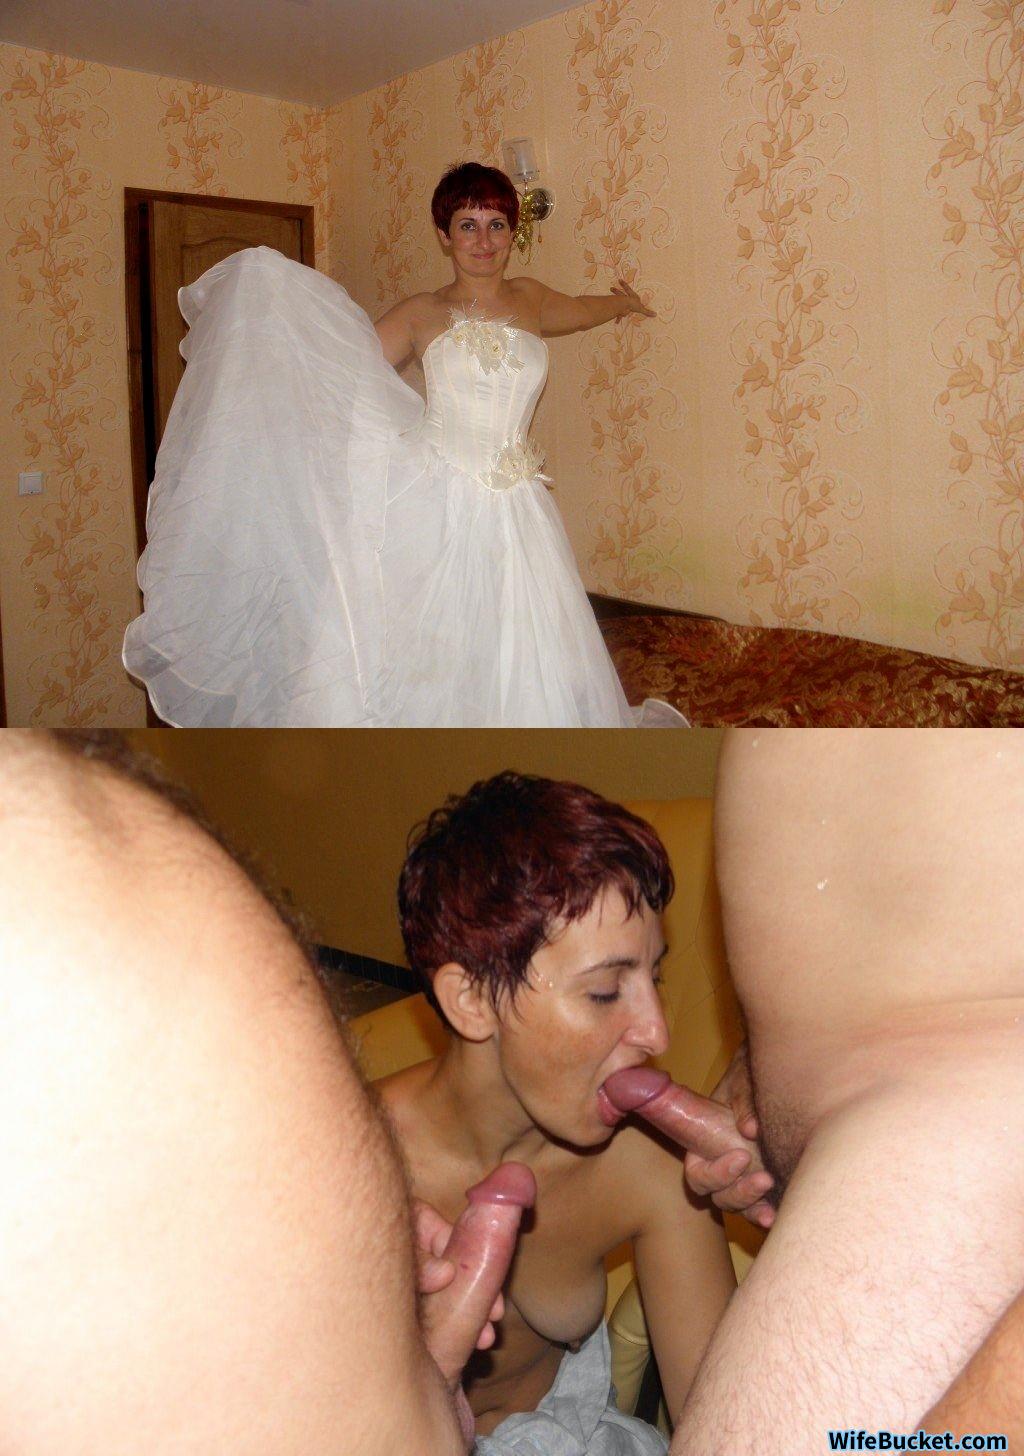 Nude Brides - Real Sexy Brides on Their Wedding Day